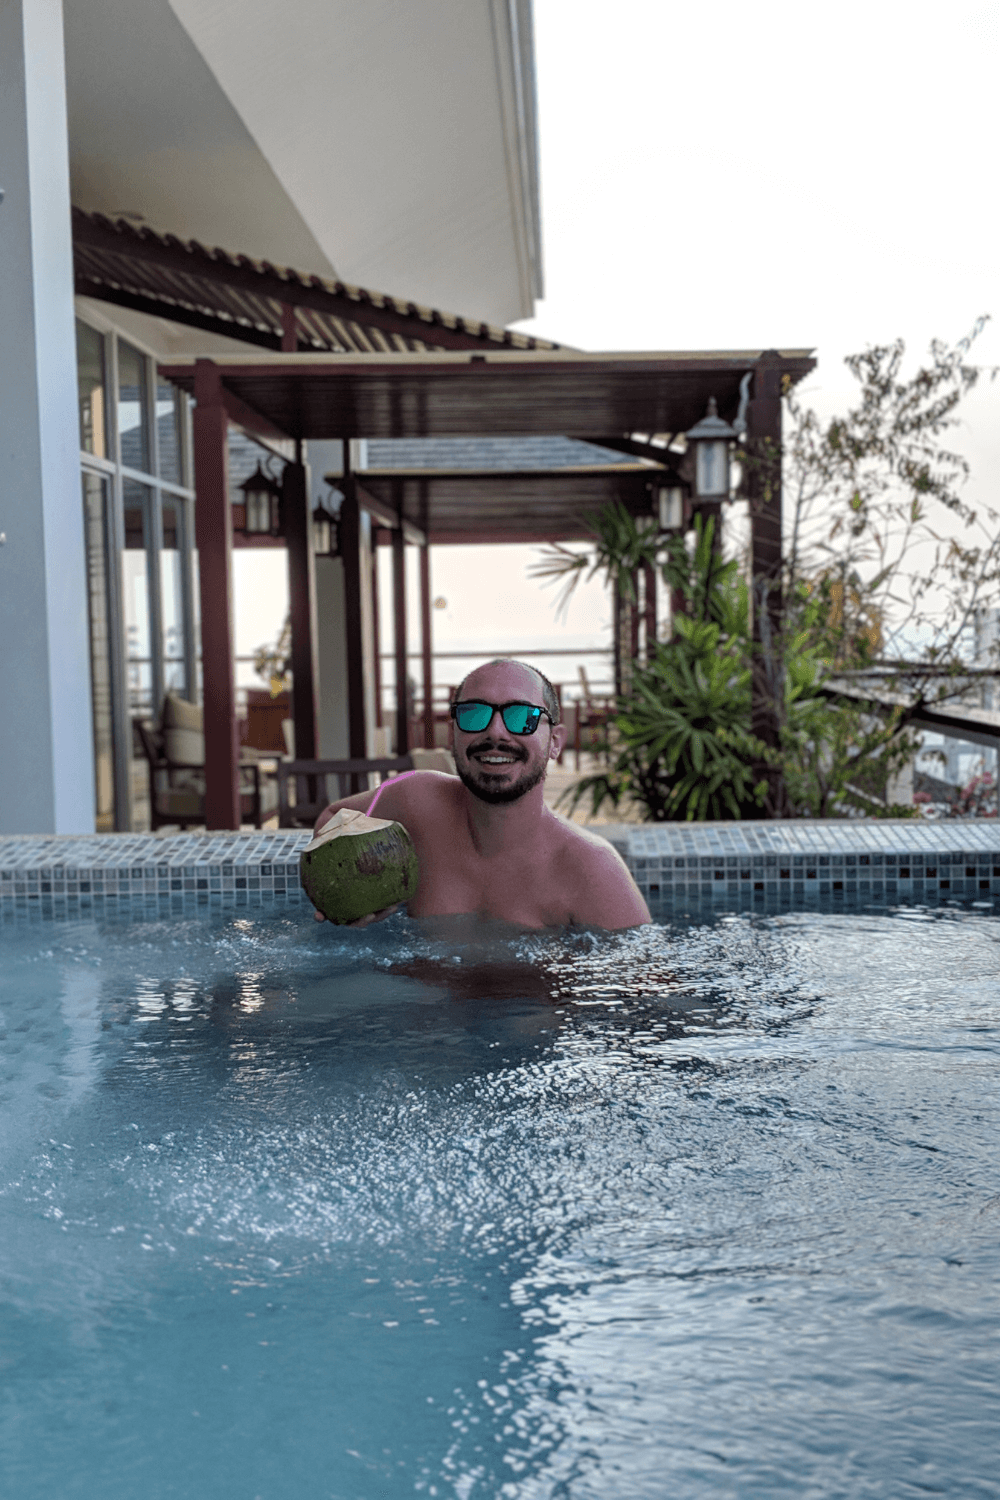 Yann holding a coconut in the private pool in Phuket